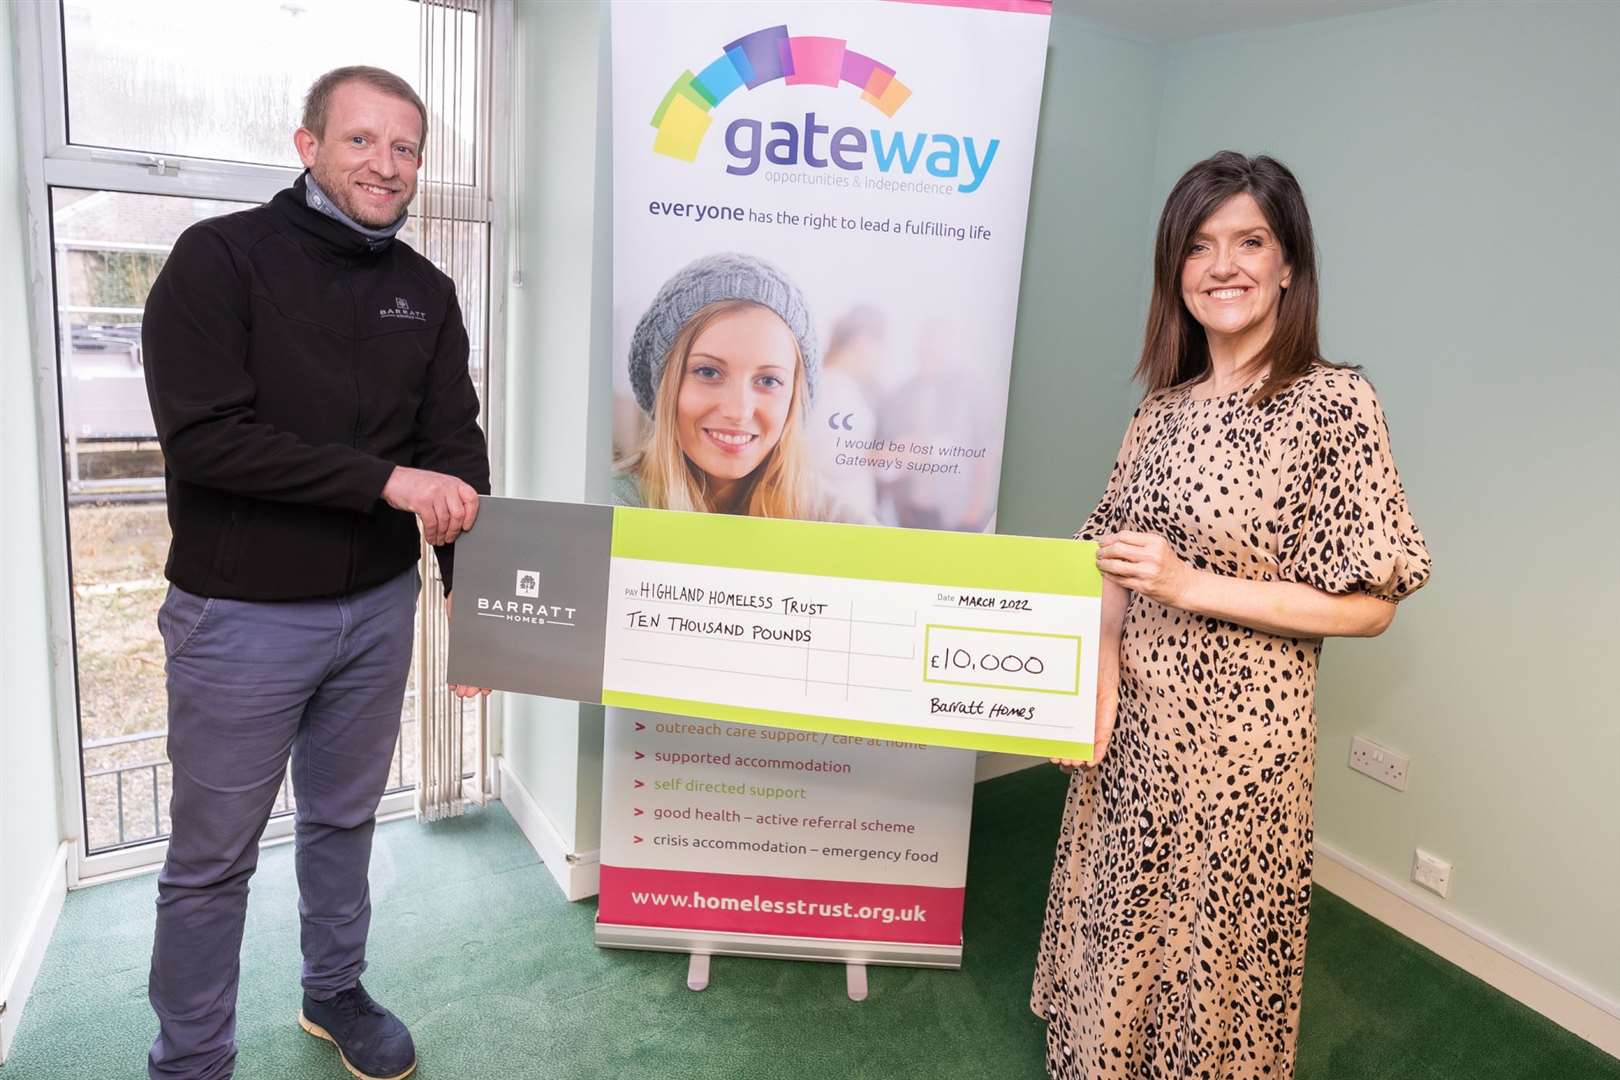 Alan Fraser, Construction manager at Barratt Scotland hands over a £10,000 donation to Clare Netherton of The Highland Homeless Trust Charity in Inverness.